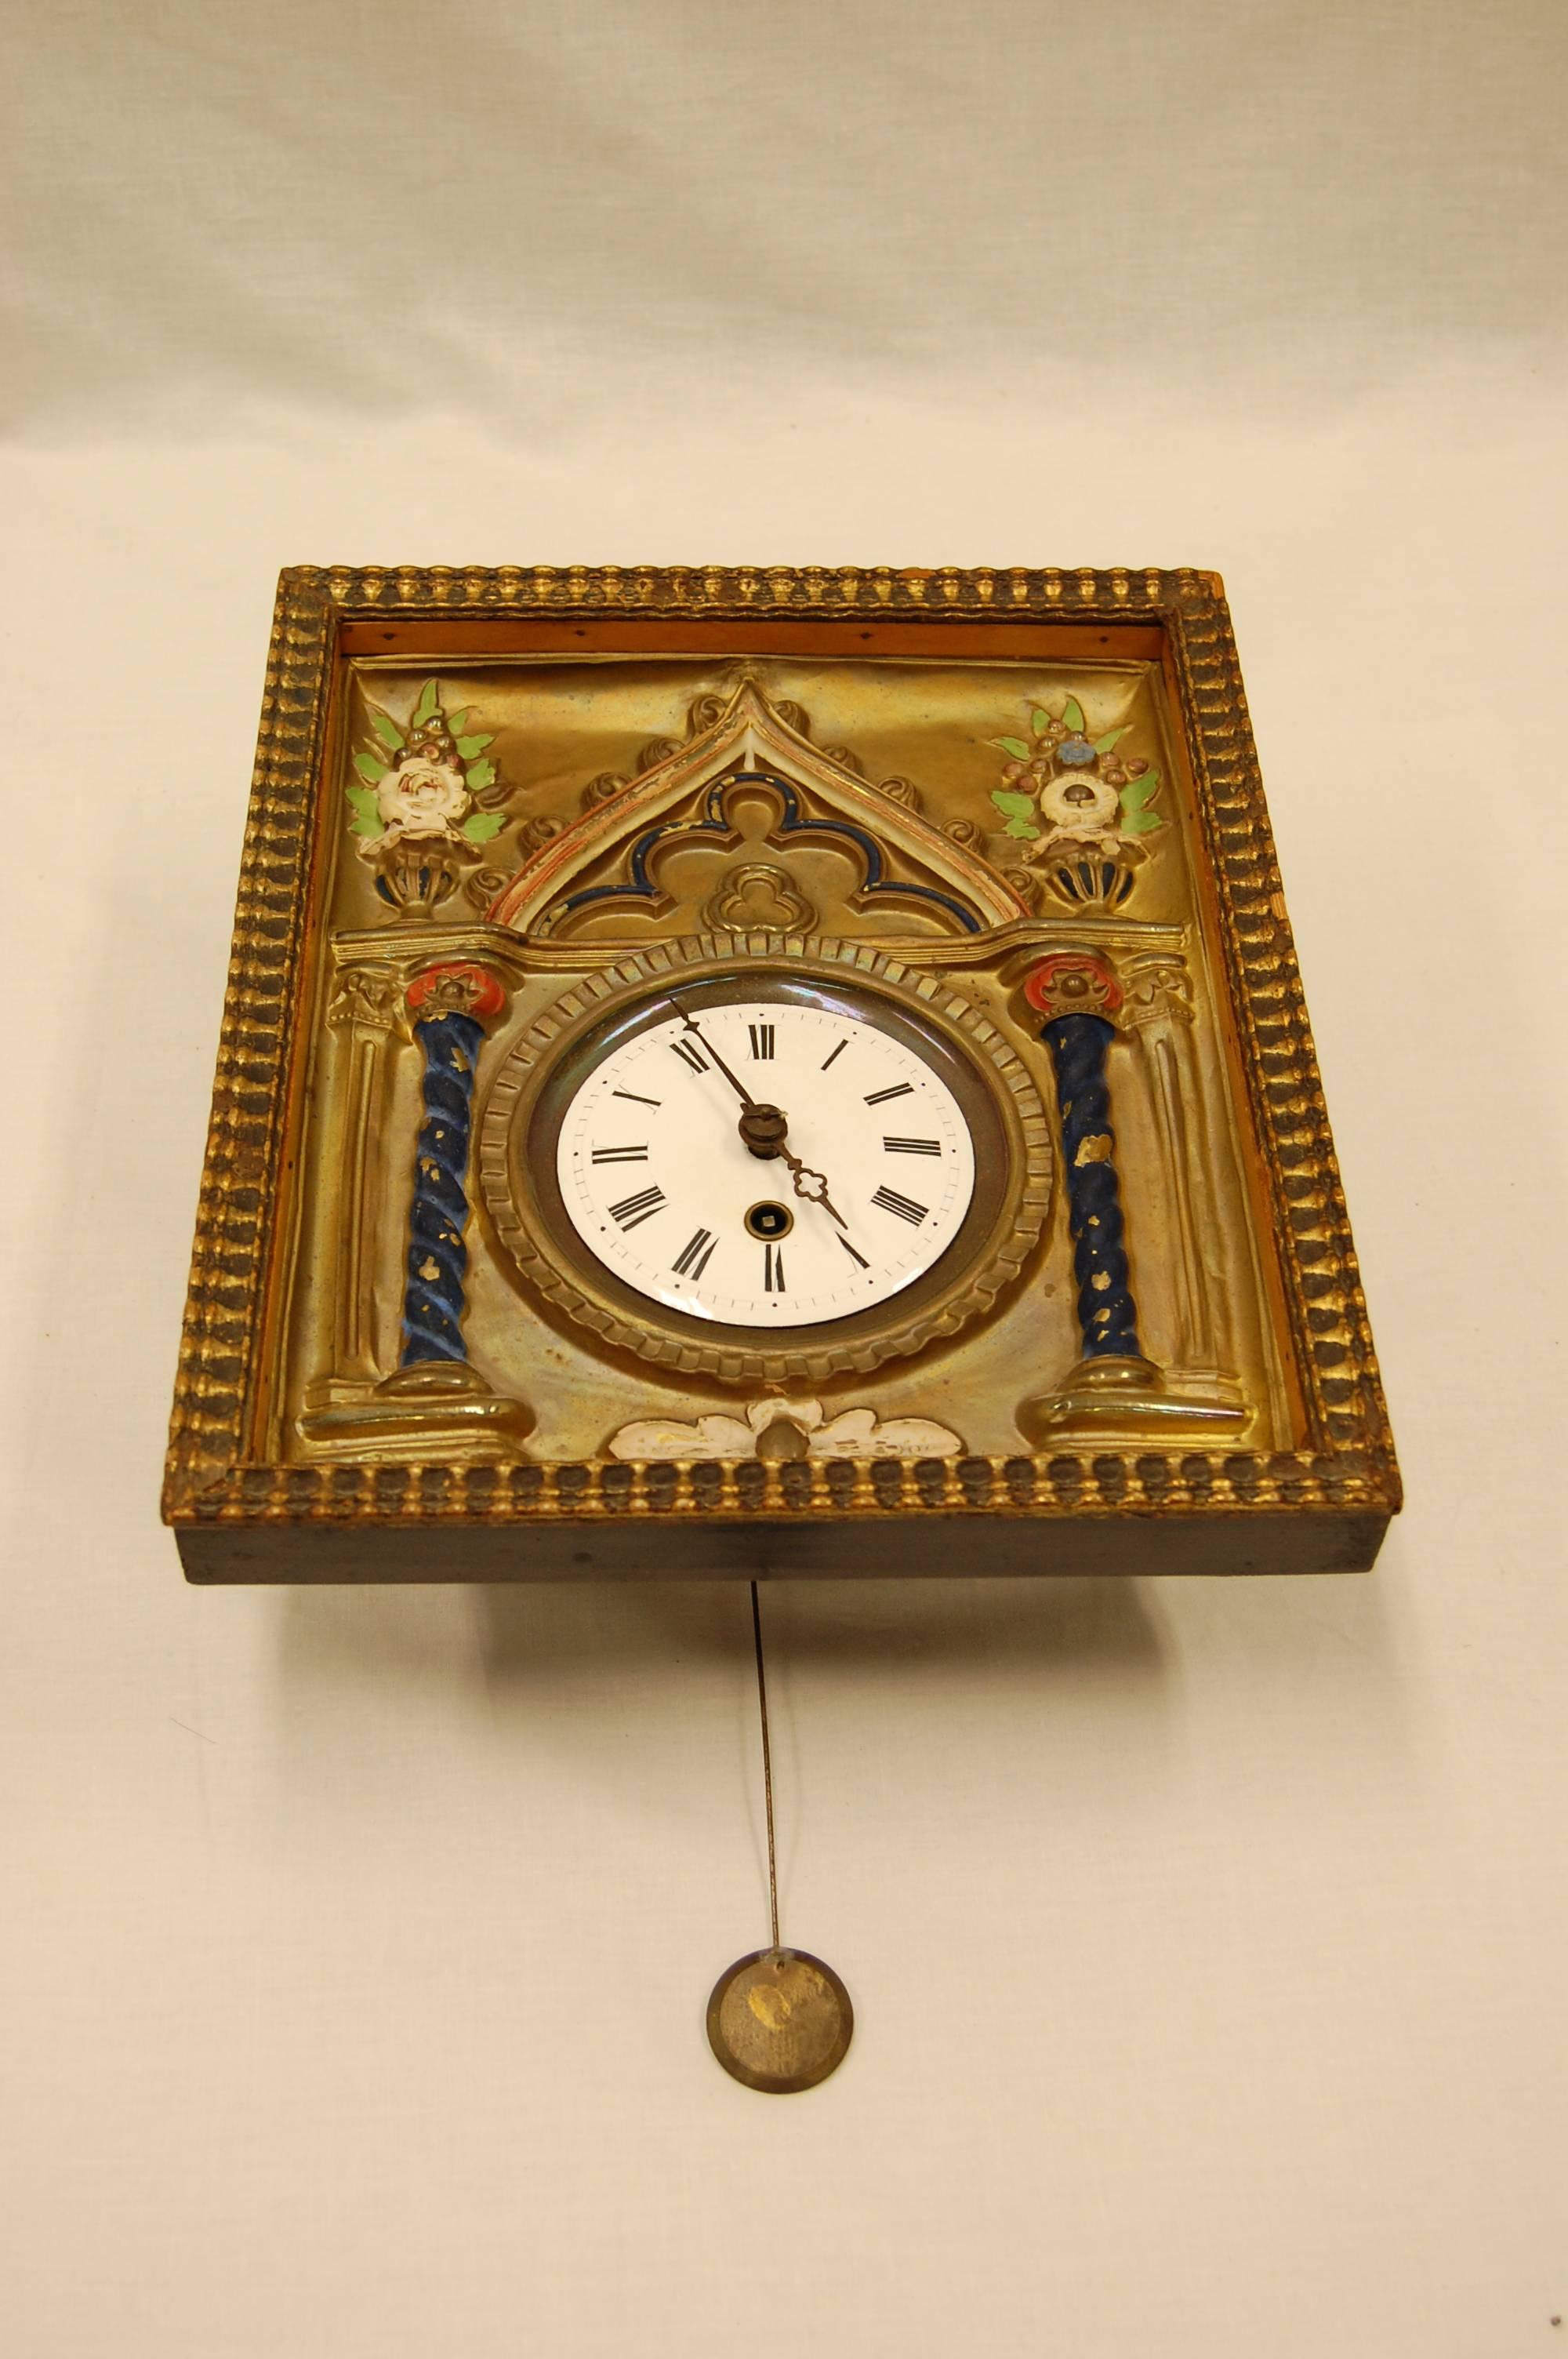 Brass repousse and enamel wag-on-wall clock with enameled dial and roman numerals. While we have owned this clock for many years, we have never attempted to check to see if it keeps time. The key does wind the mechanism and it will run for a time,